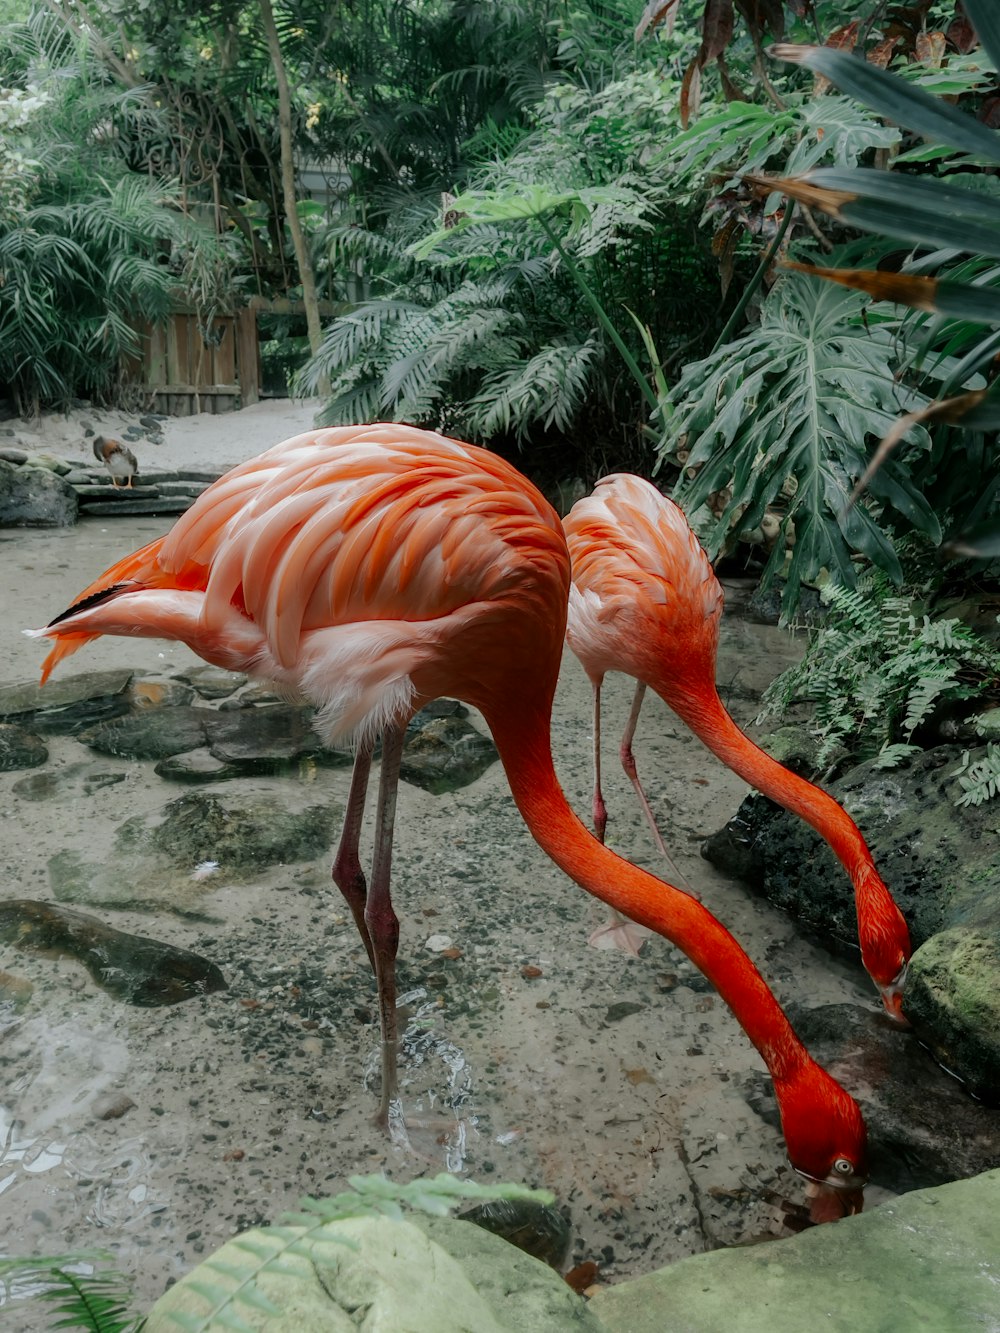 a pink flamingo standing on a rock next to a body of water